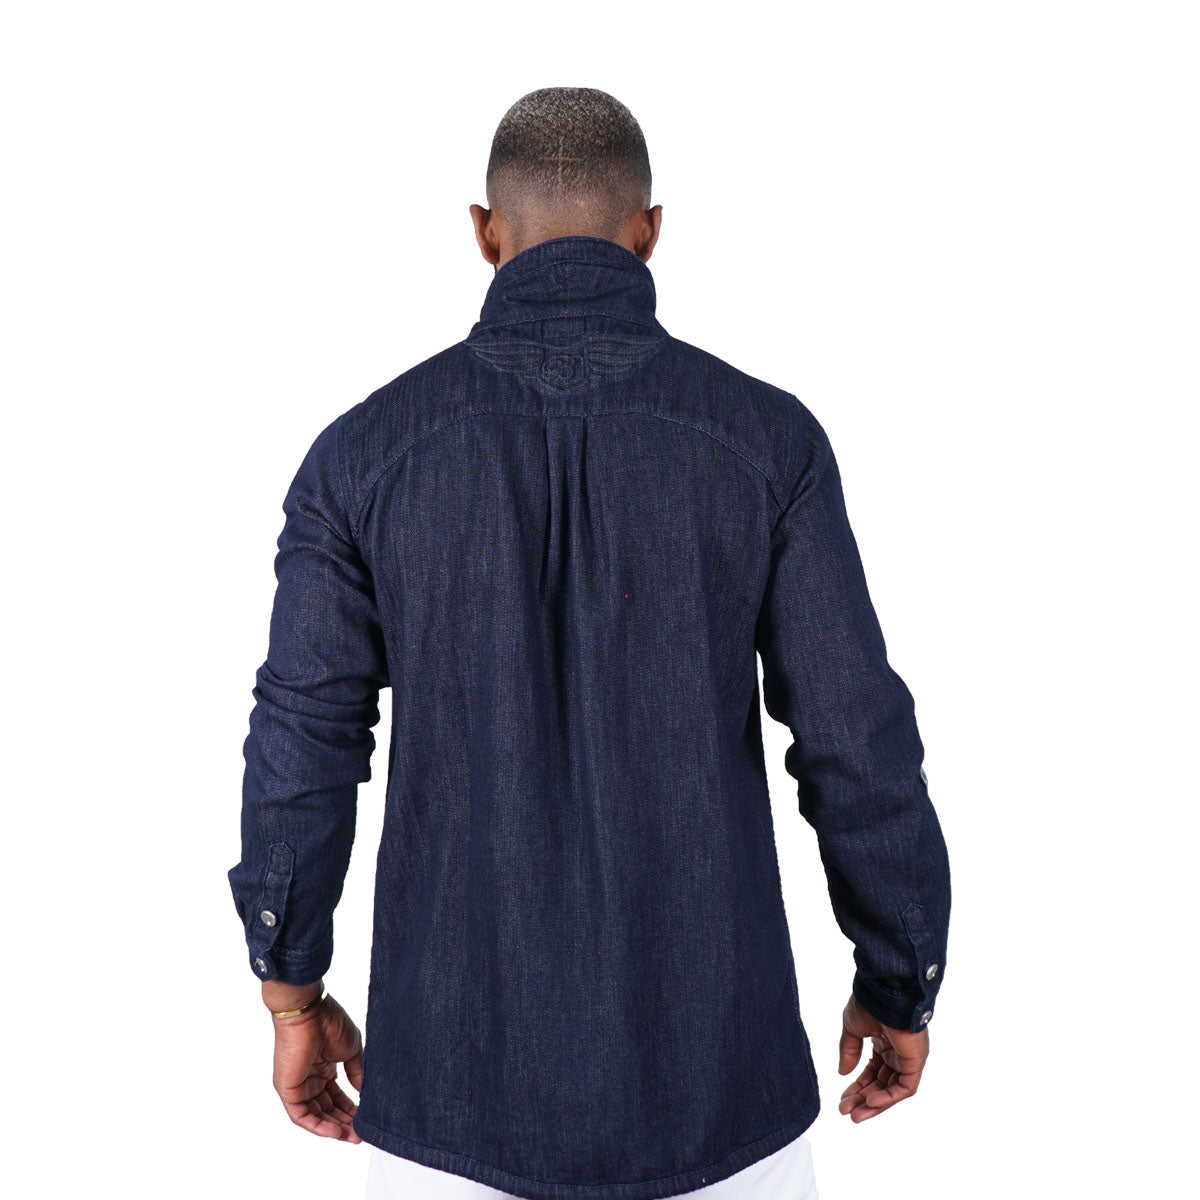 This shot showcases an embossed fabric bogart logo on the back that has a great feel